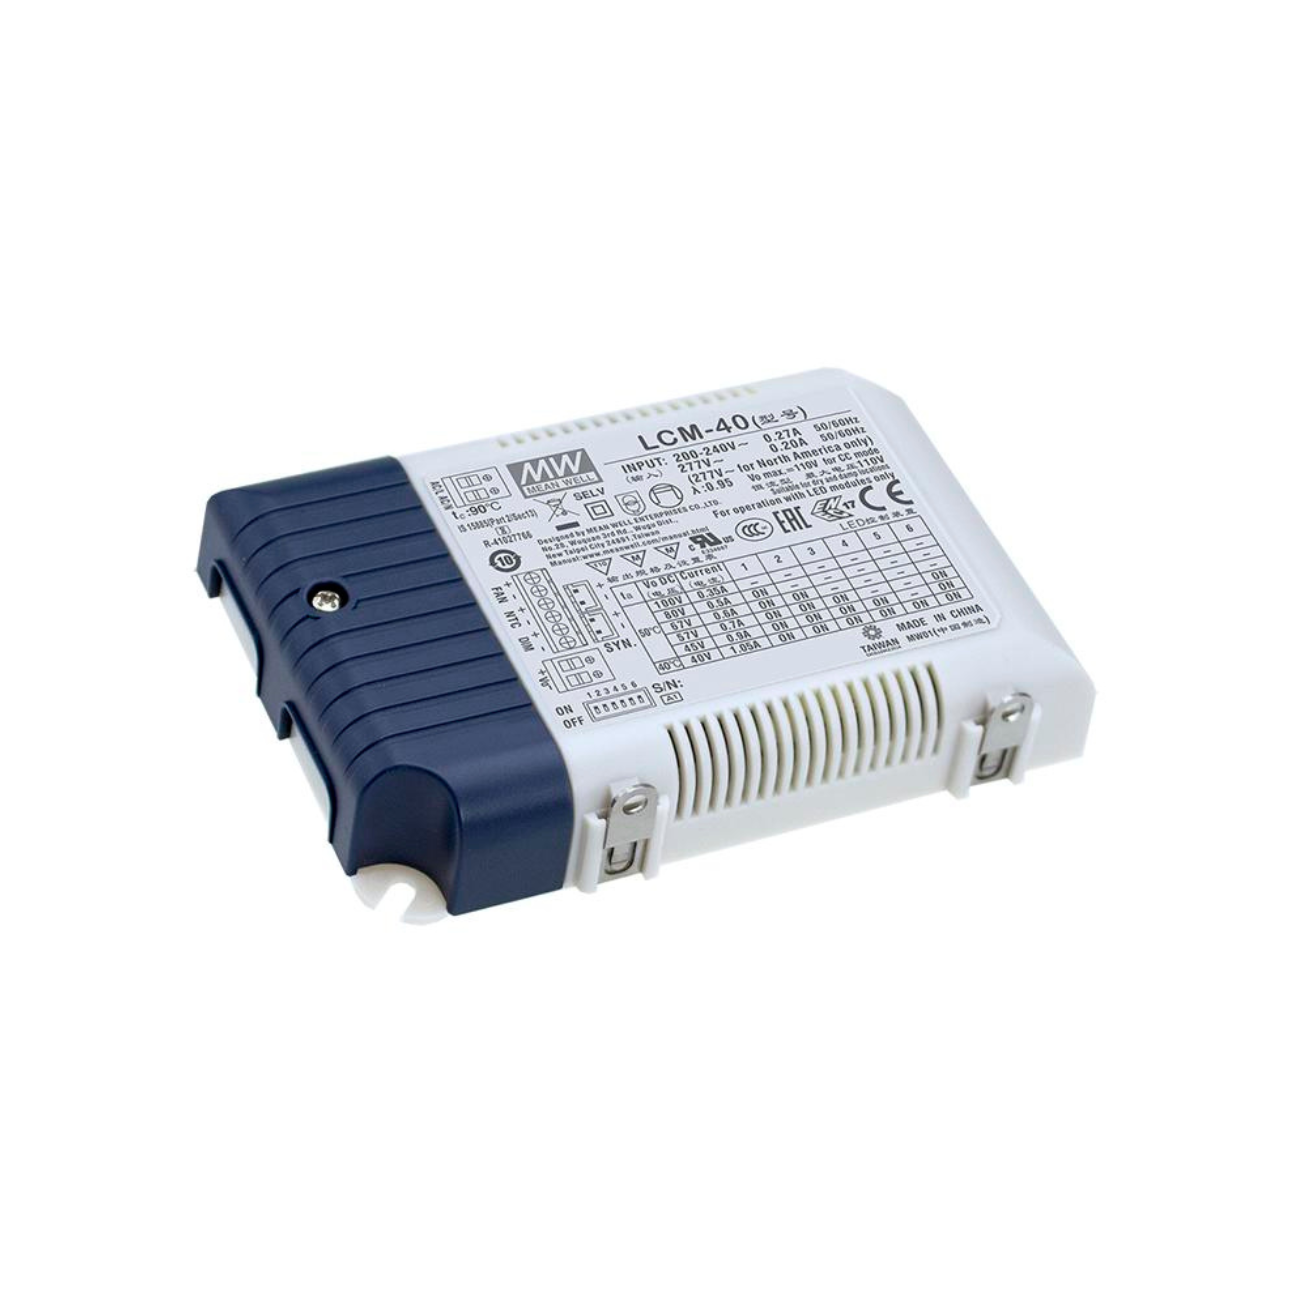 MeanWell LCM-40BLE (42W/2-100V), dimmbar, LED-Netzteil